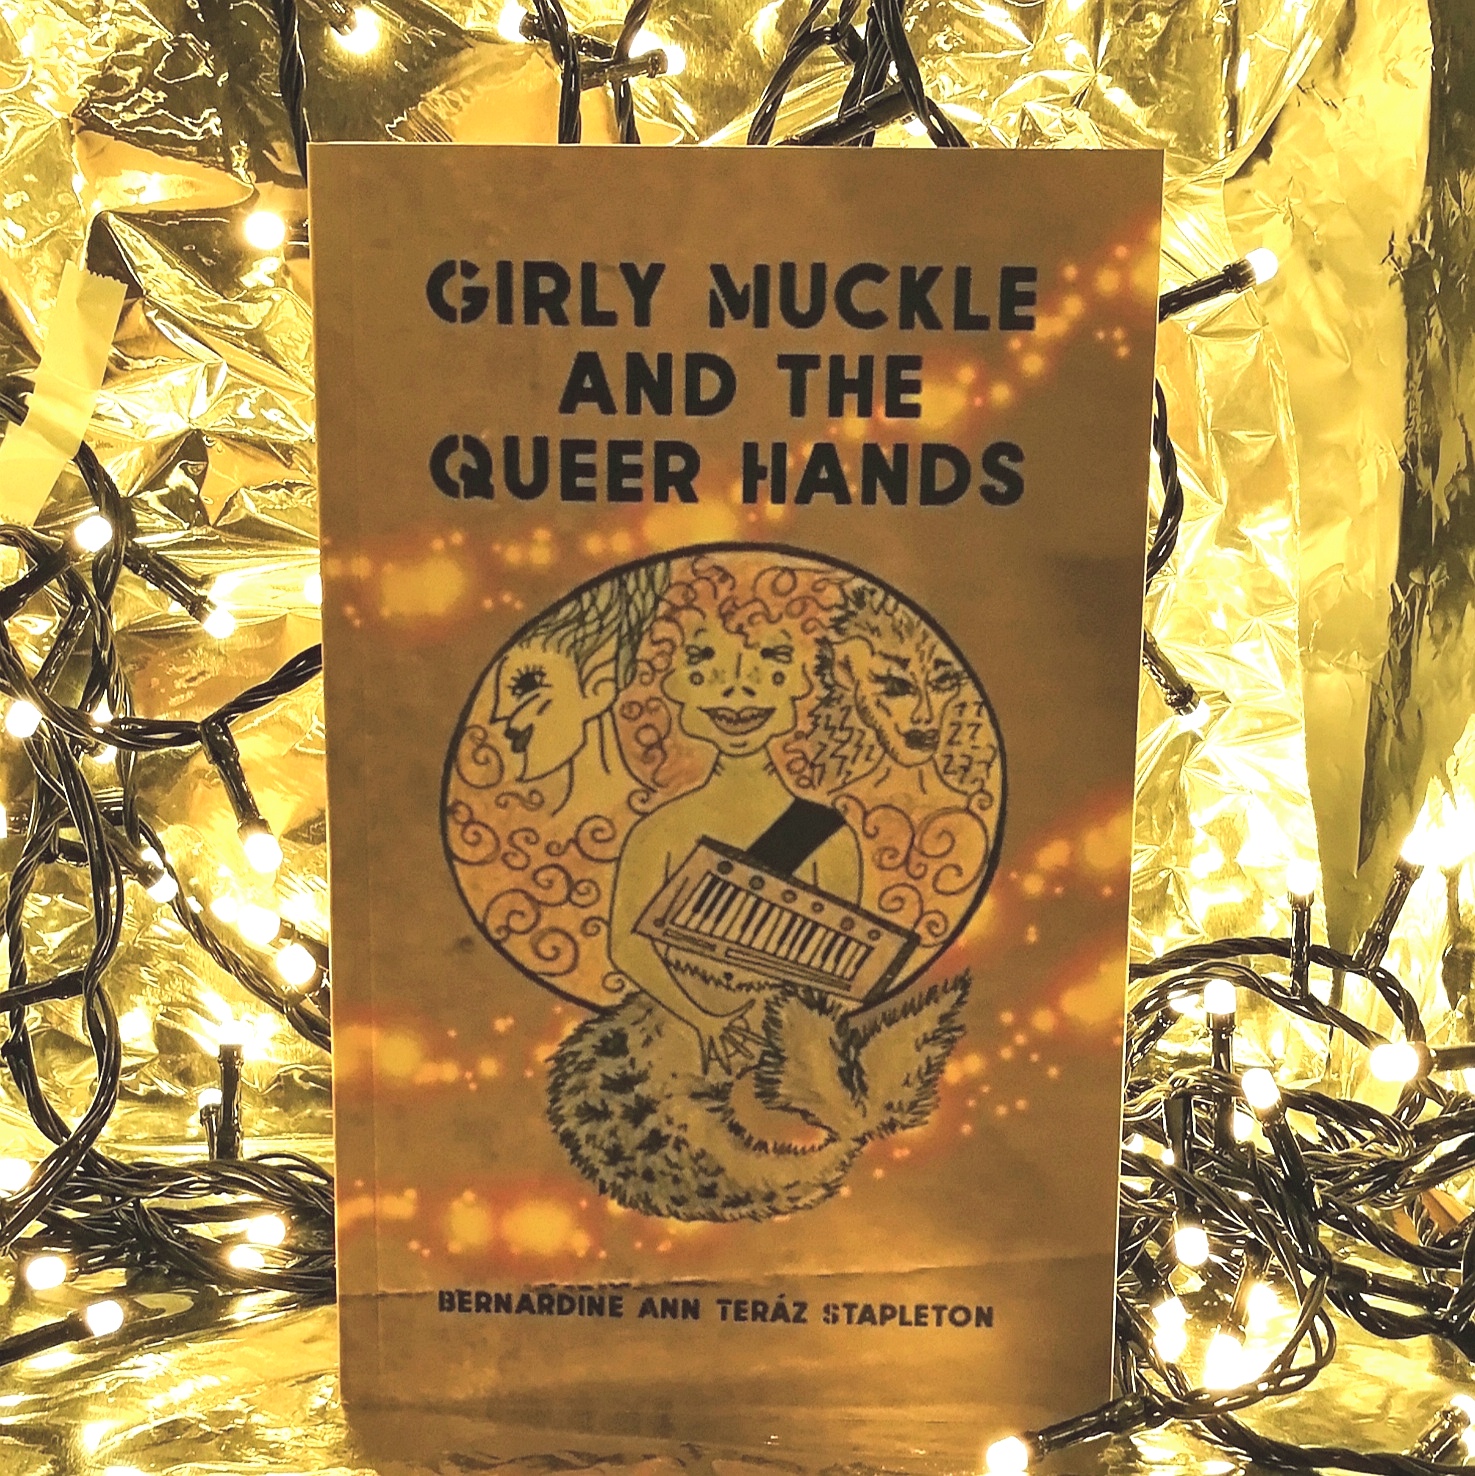 Girly Muckle and the Queer Hands in Lights